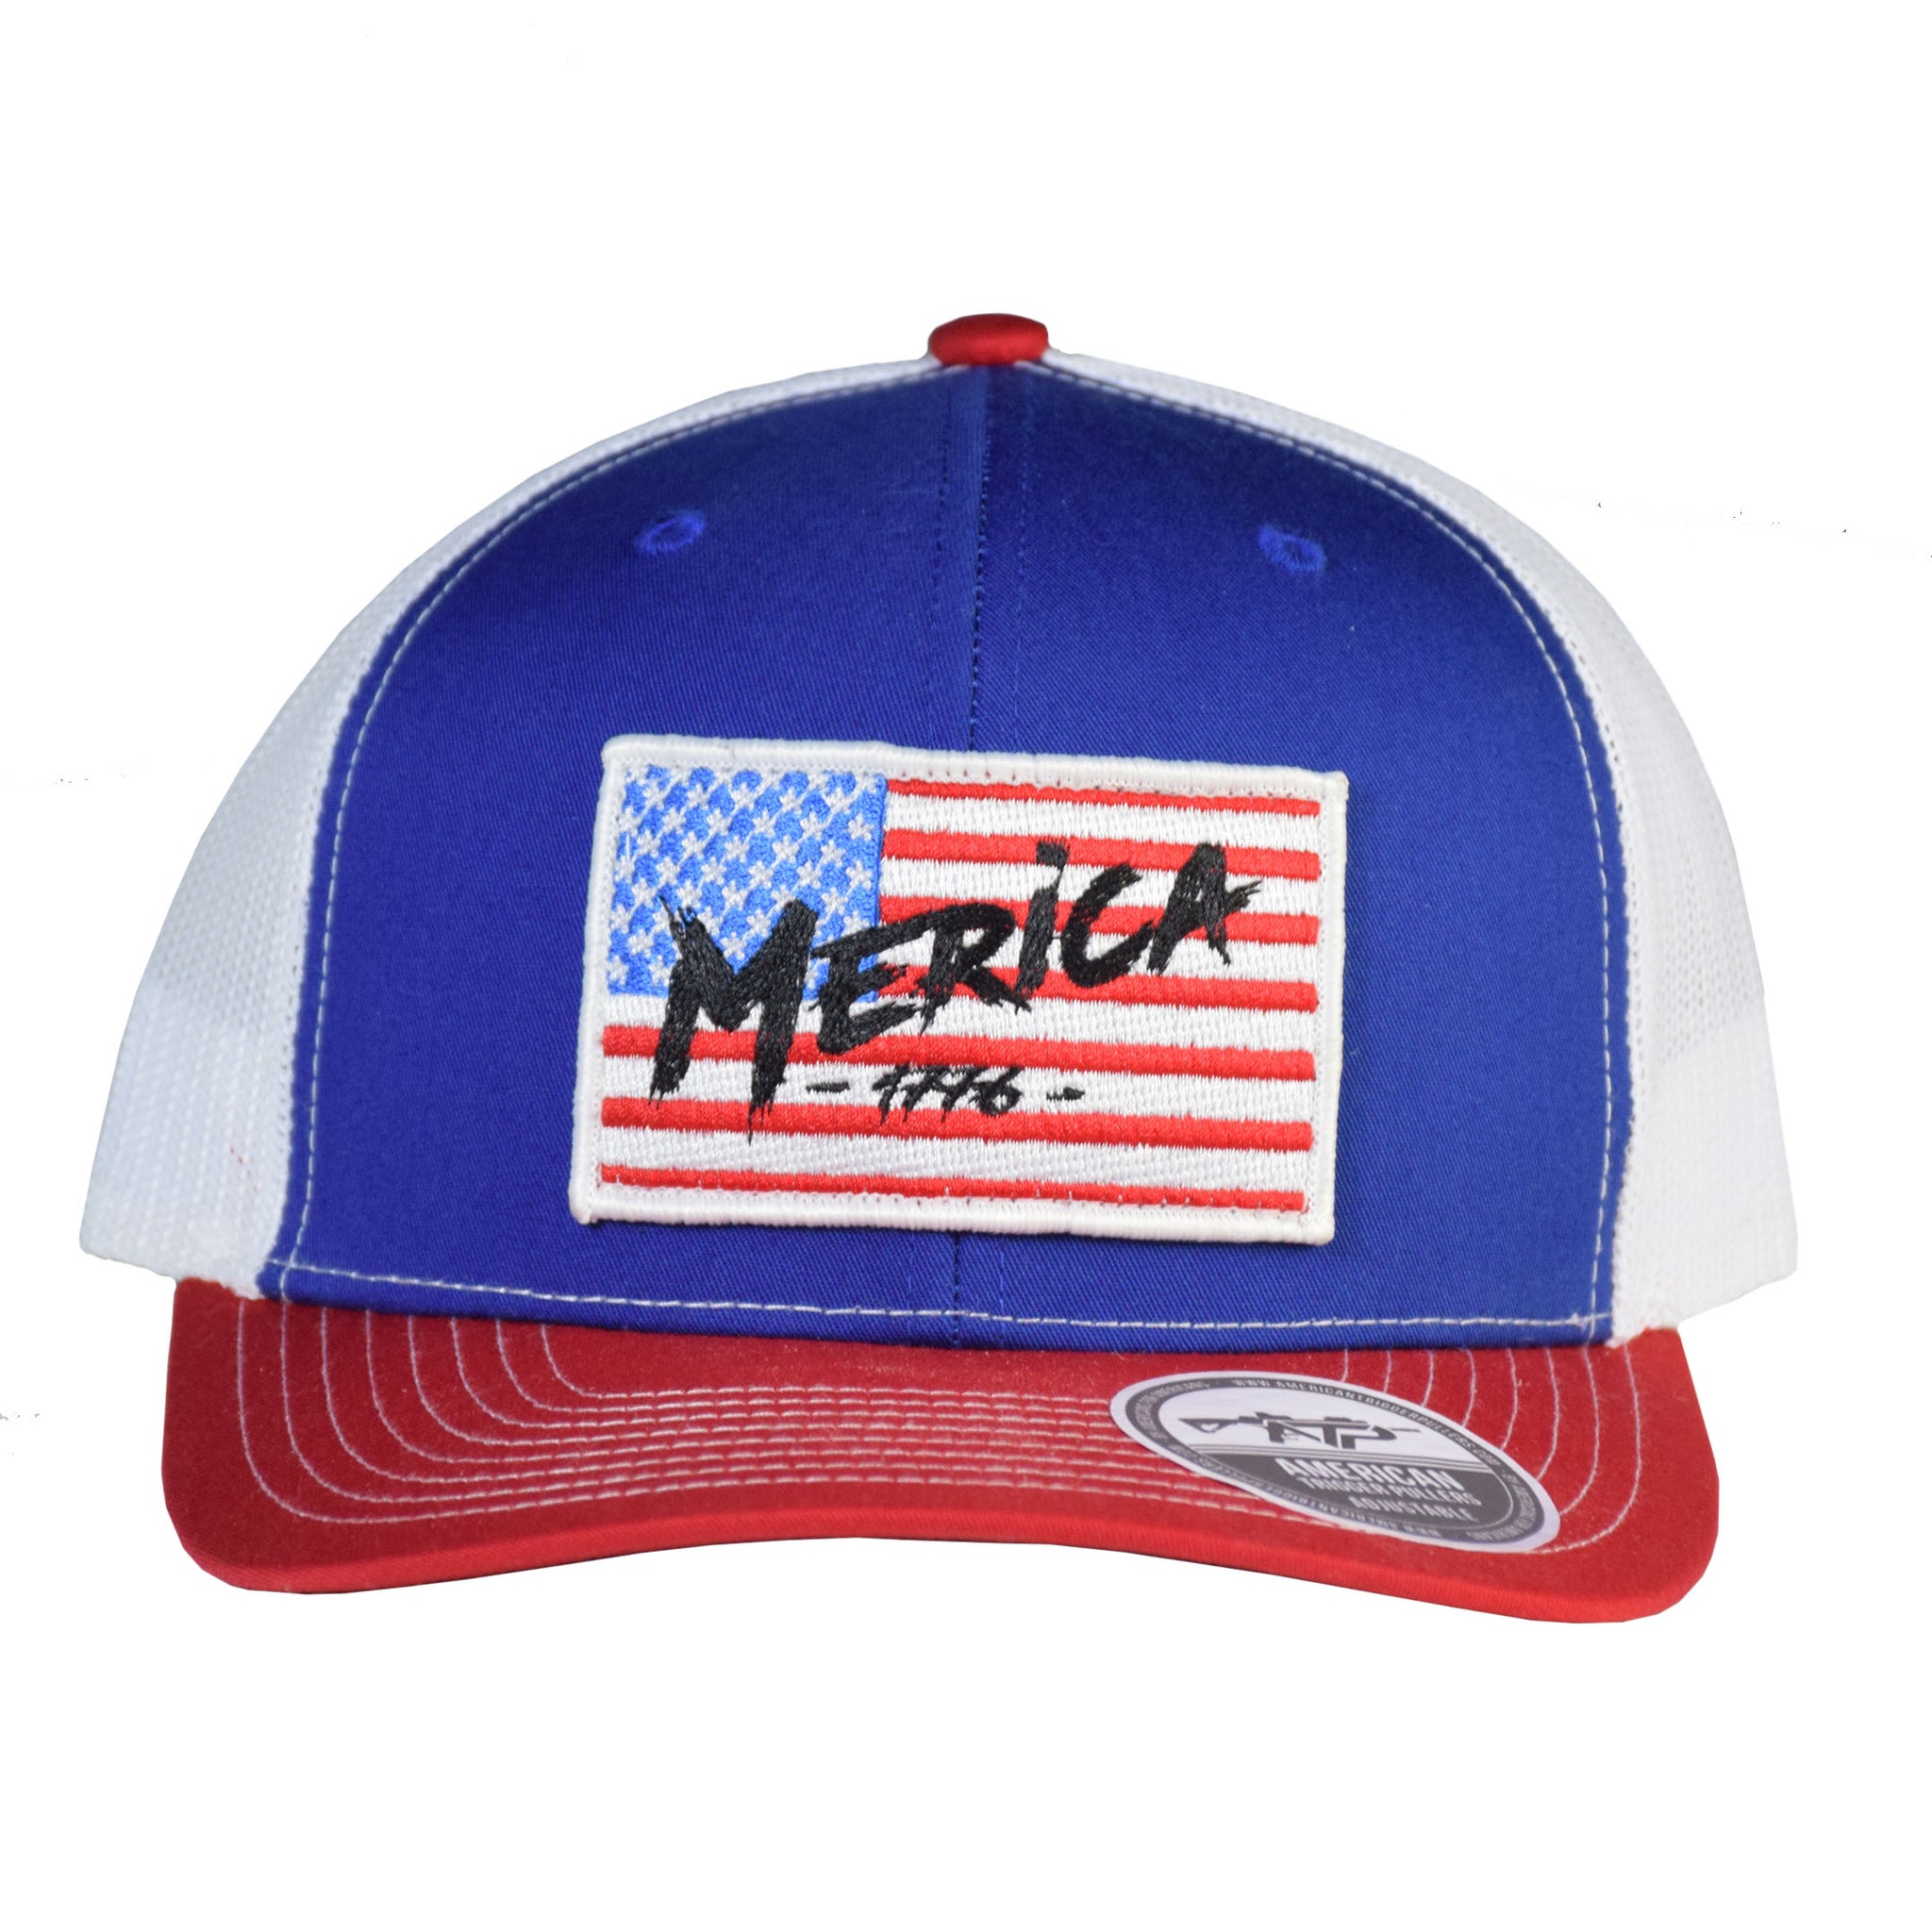 Merica 1776 Snapback - Limited Edition - American Trigger Pullers